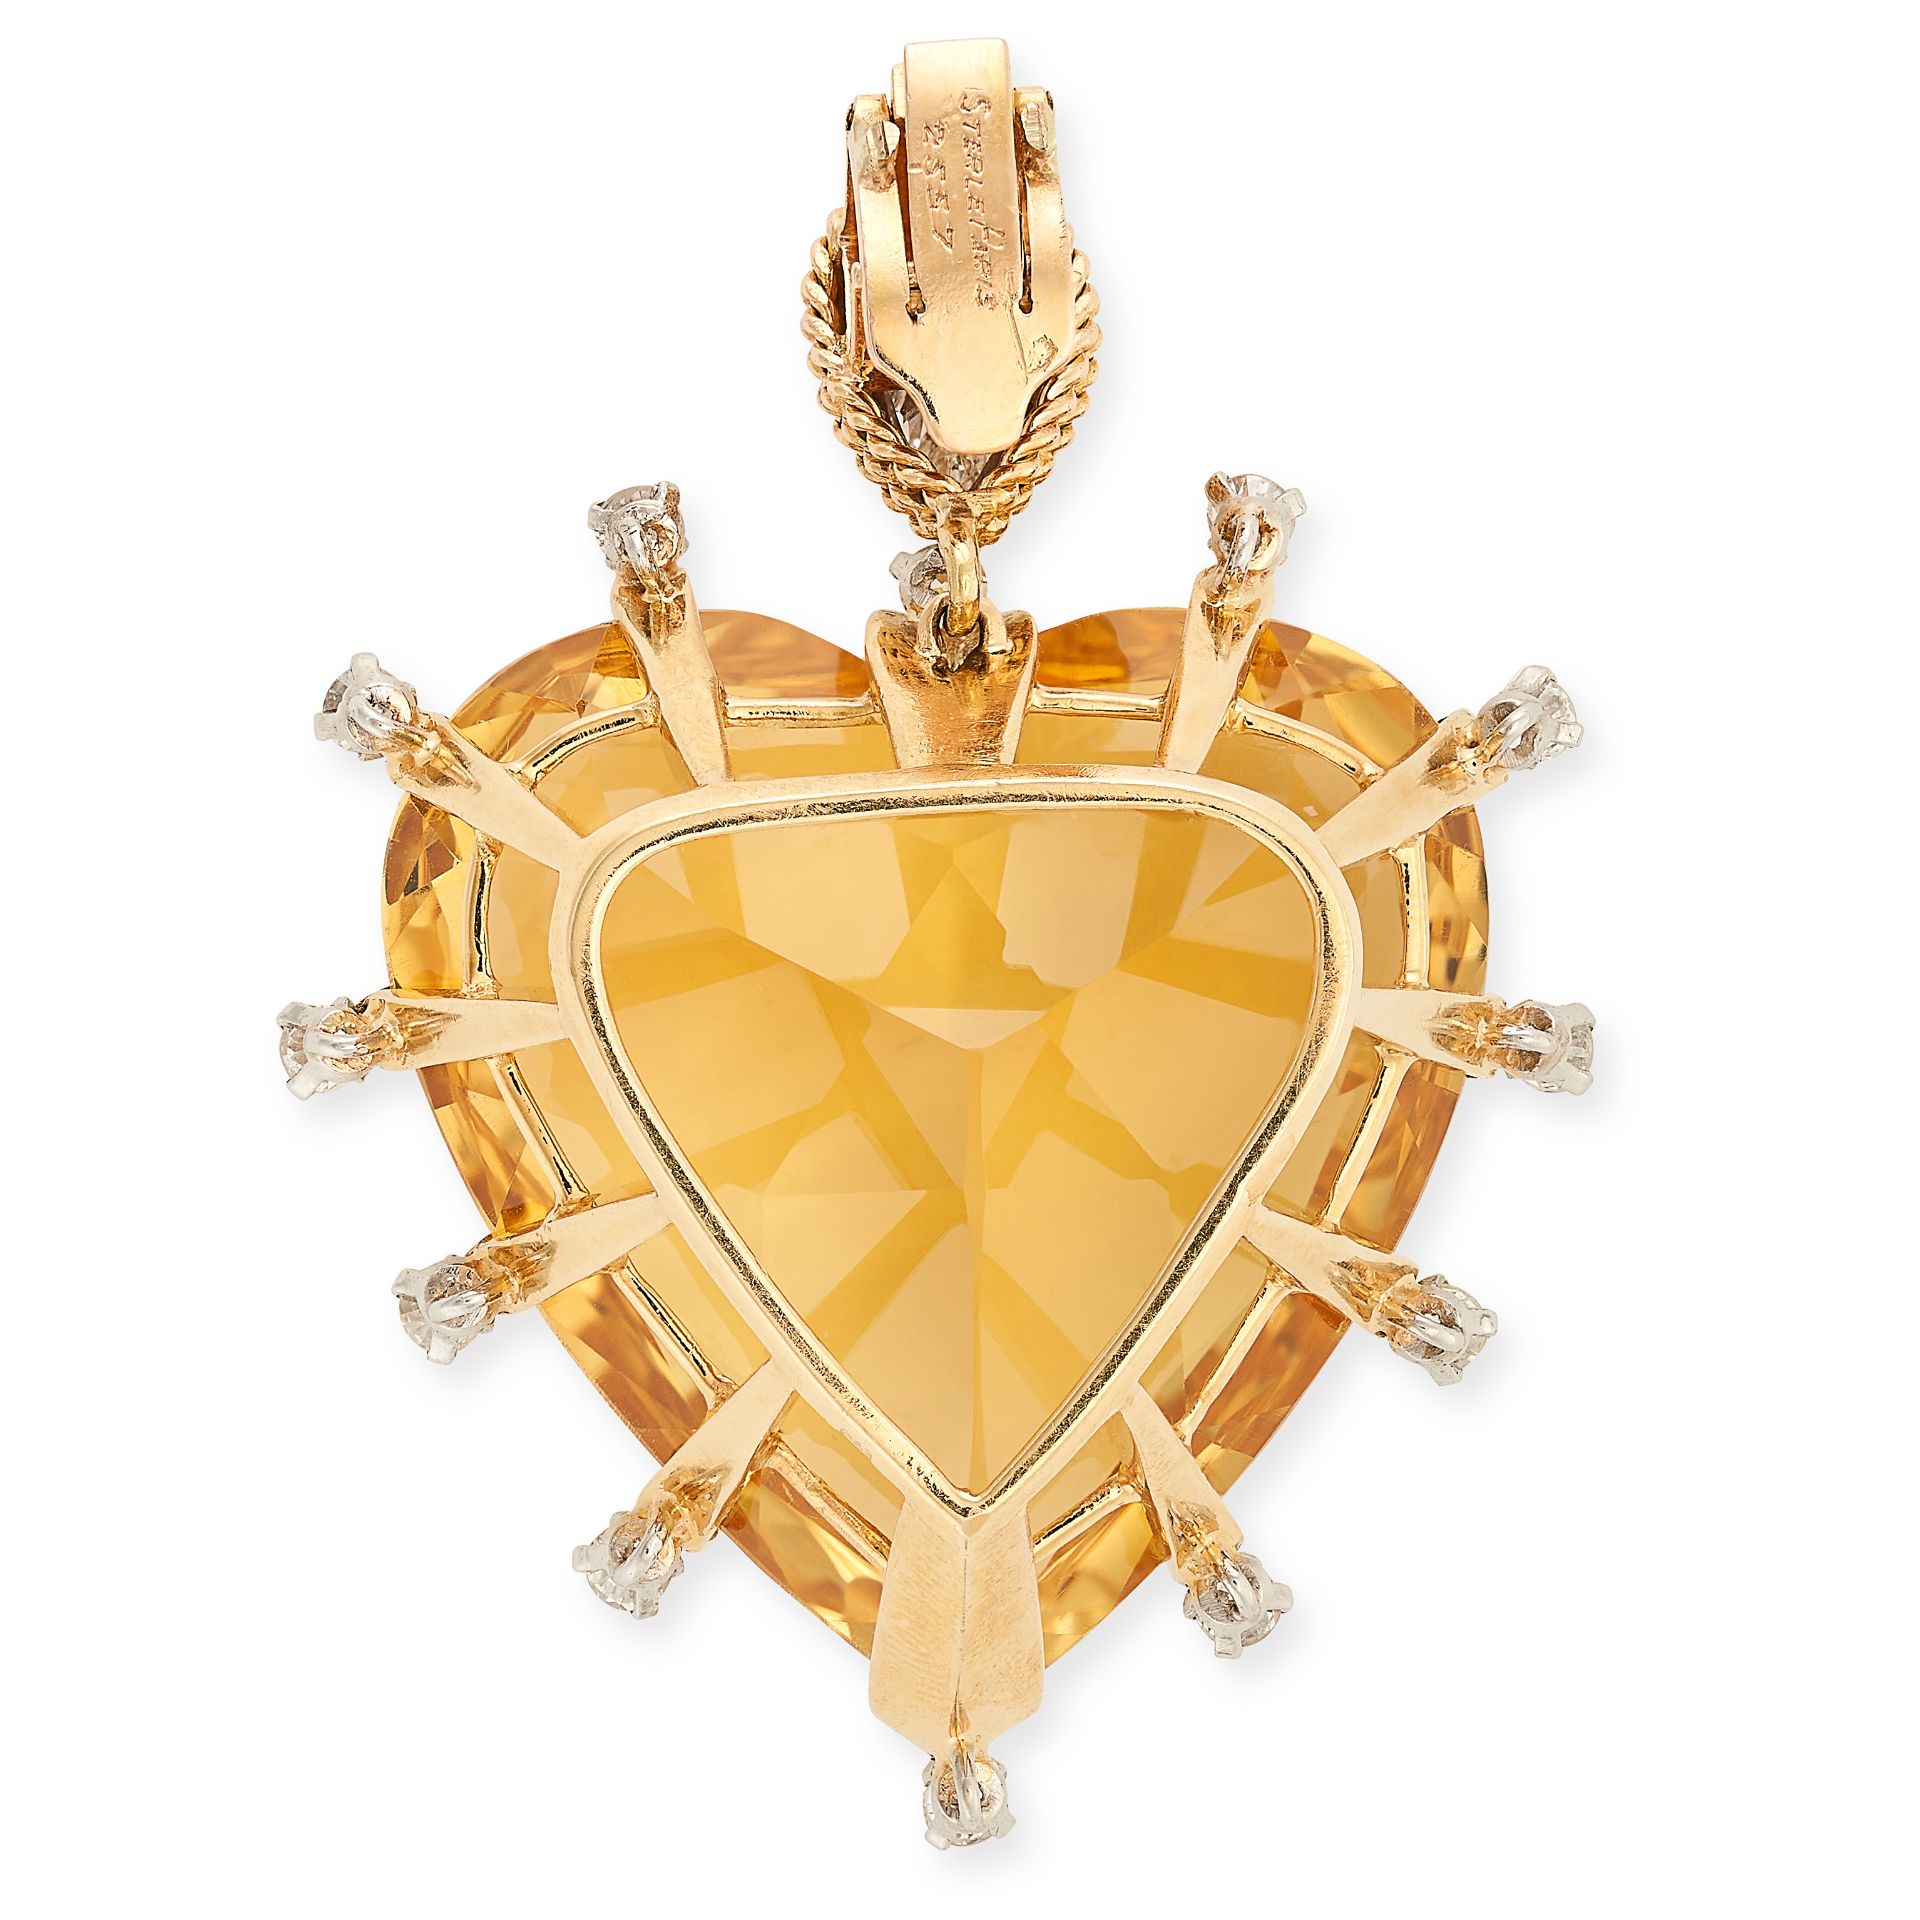 PIERRE STERLE, A FINE VINTAGE FRENCH HEART SHAPED CITRINE AND DIAMOND PENDANT in 18ct yellow gold - Image 2 of 2